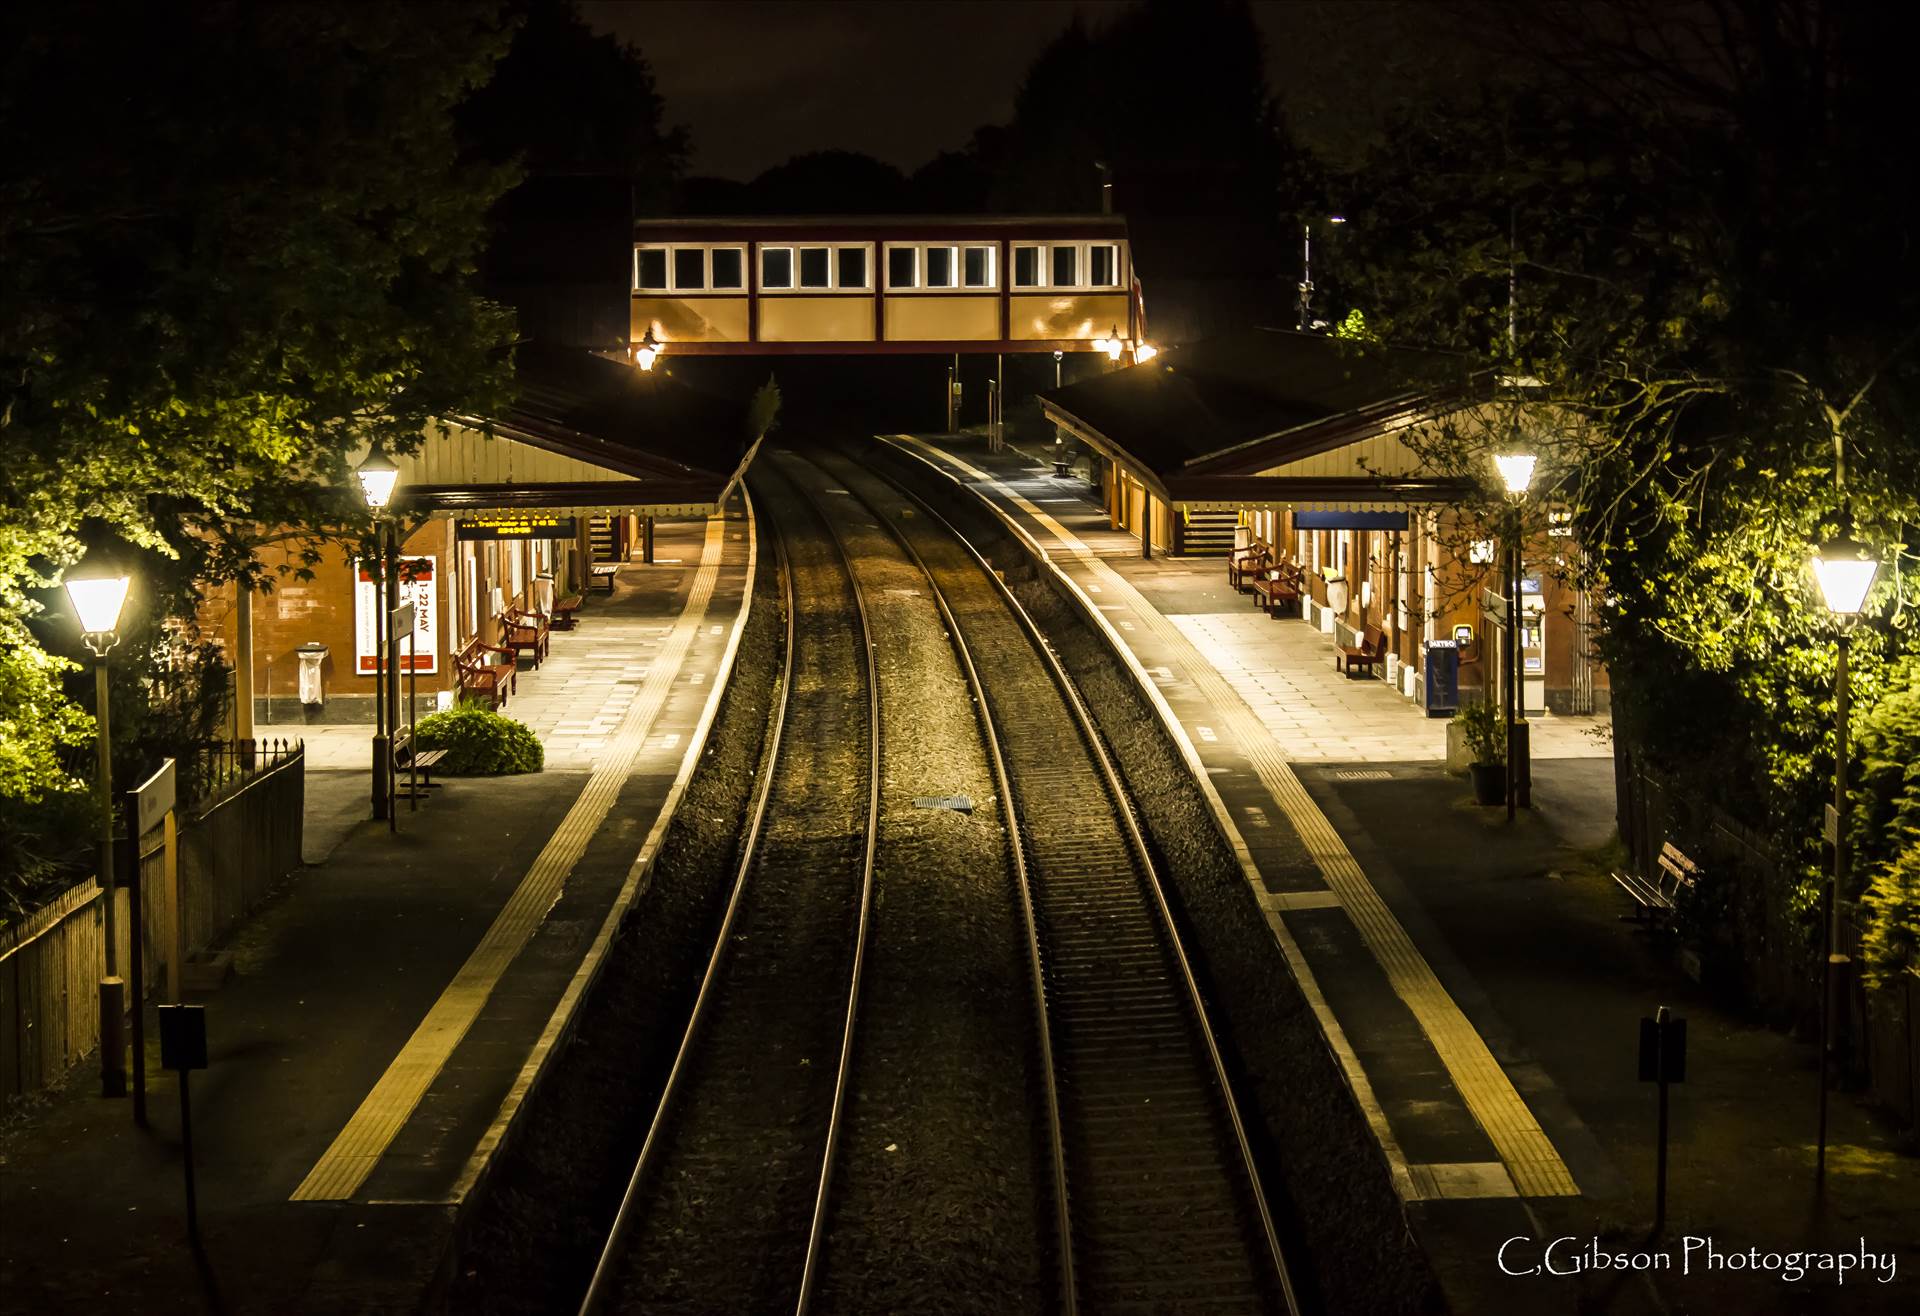 Station.jpg - undefined by Craig Gibson